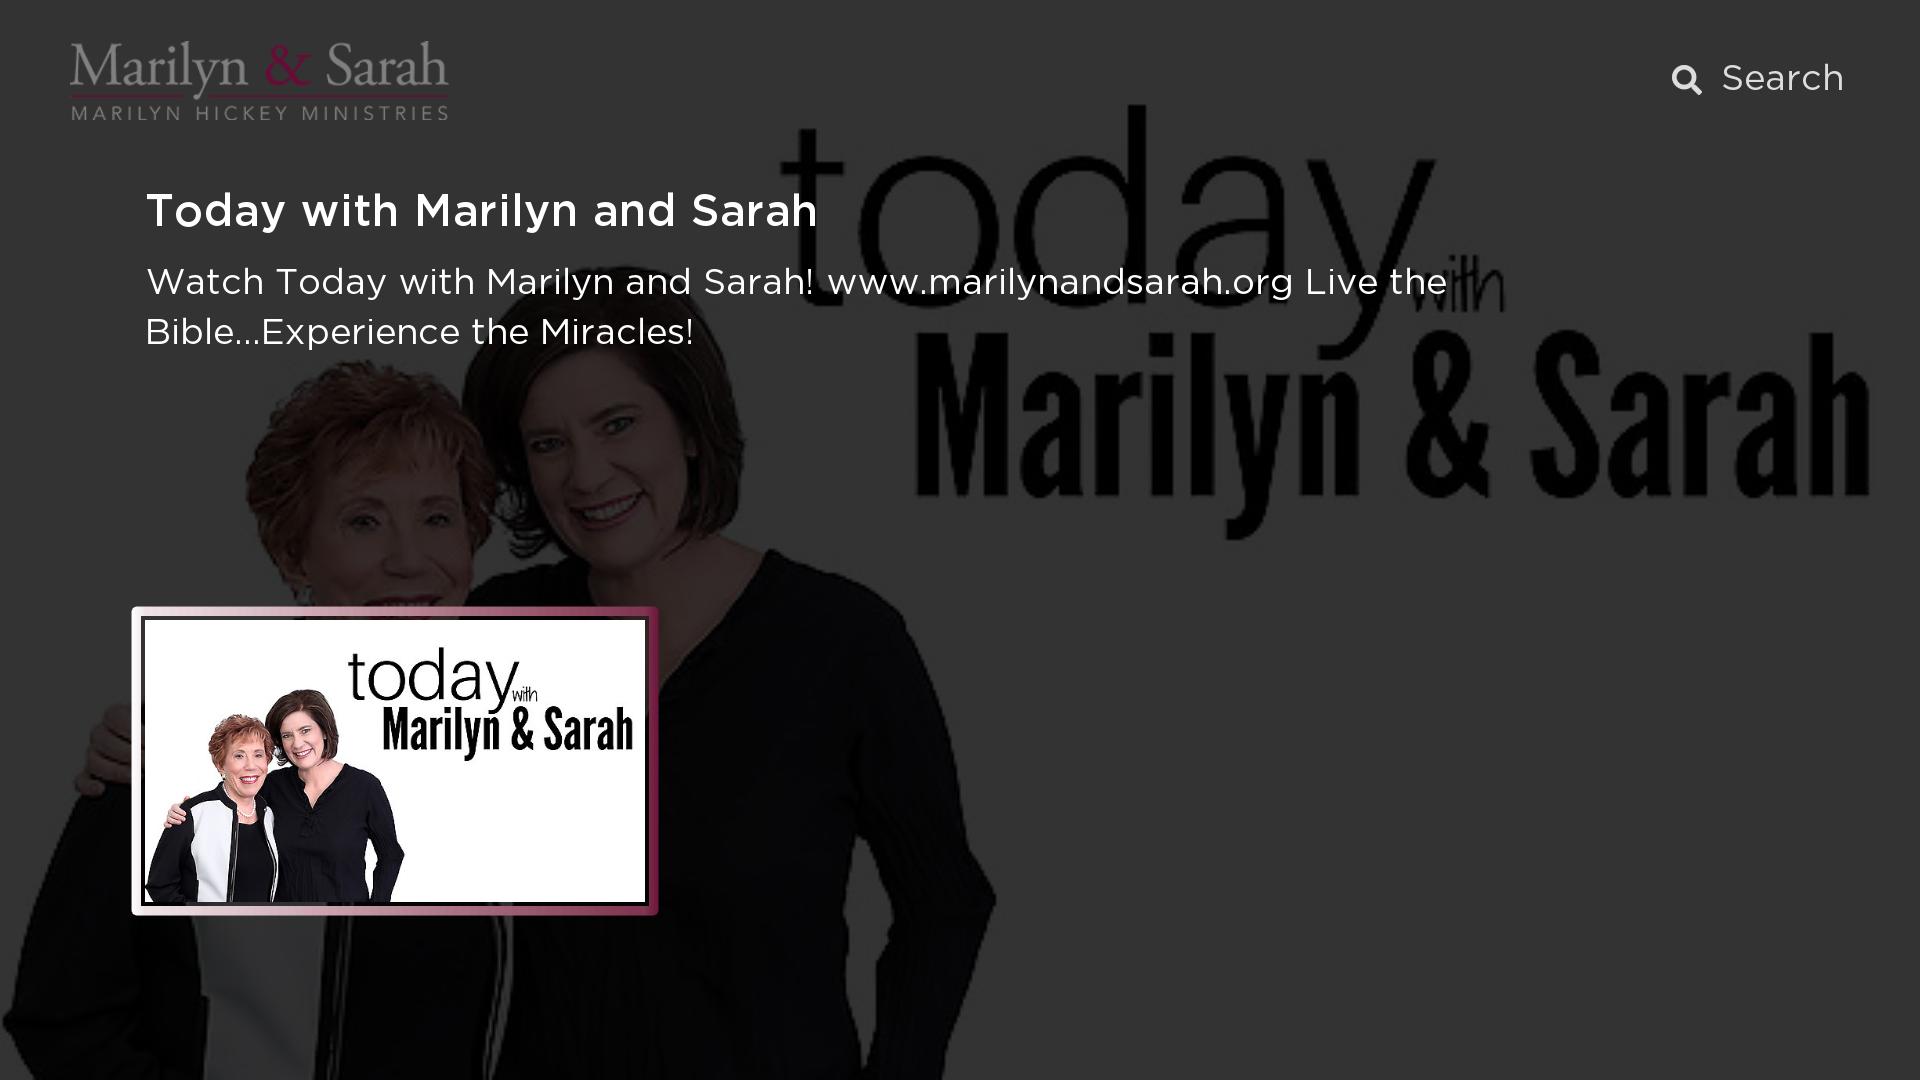 Today with Marilyn and Sarah Screenshot 001